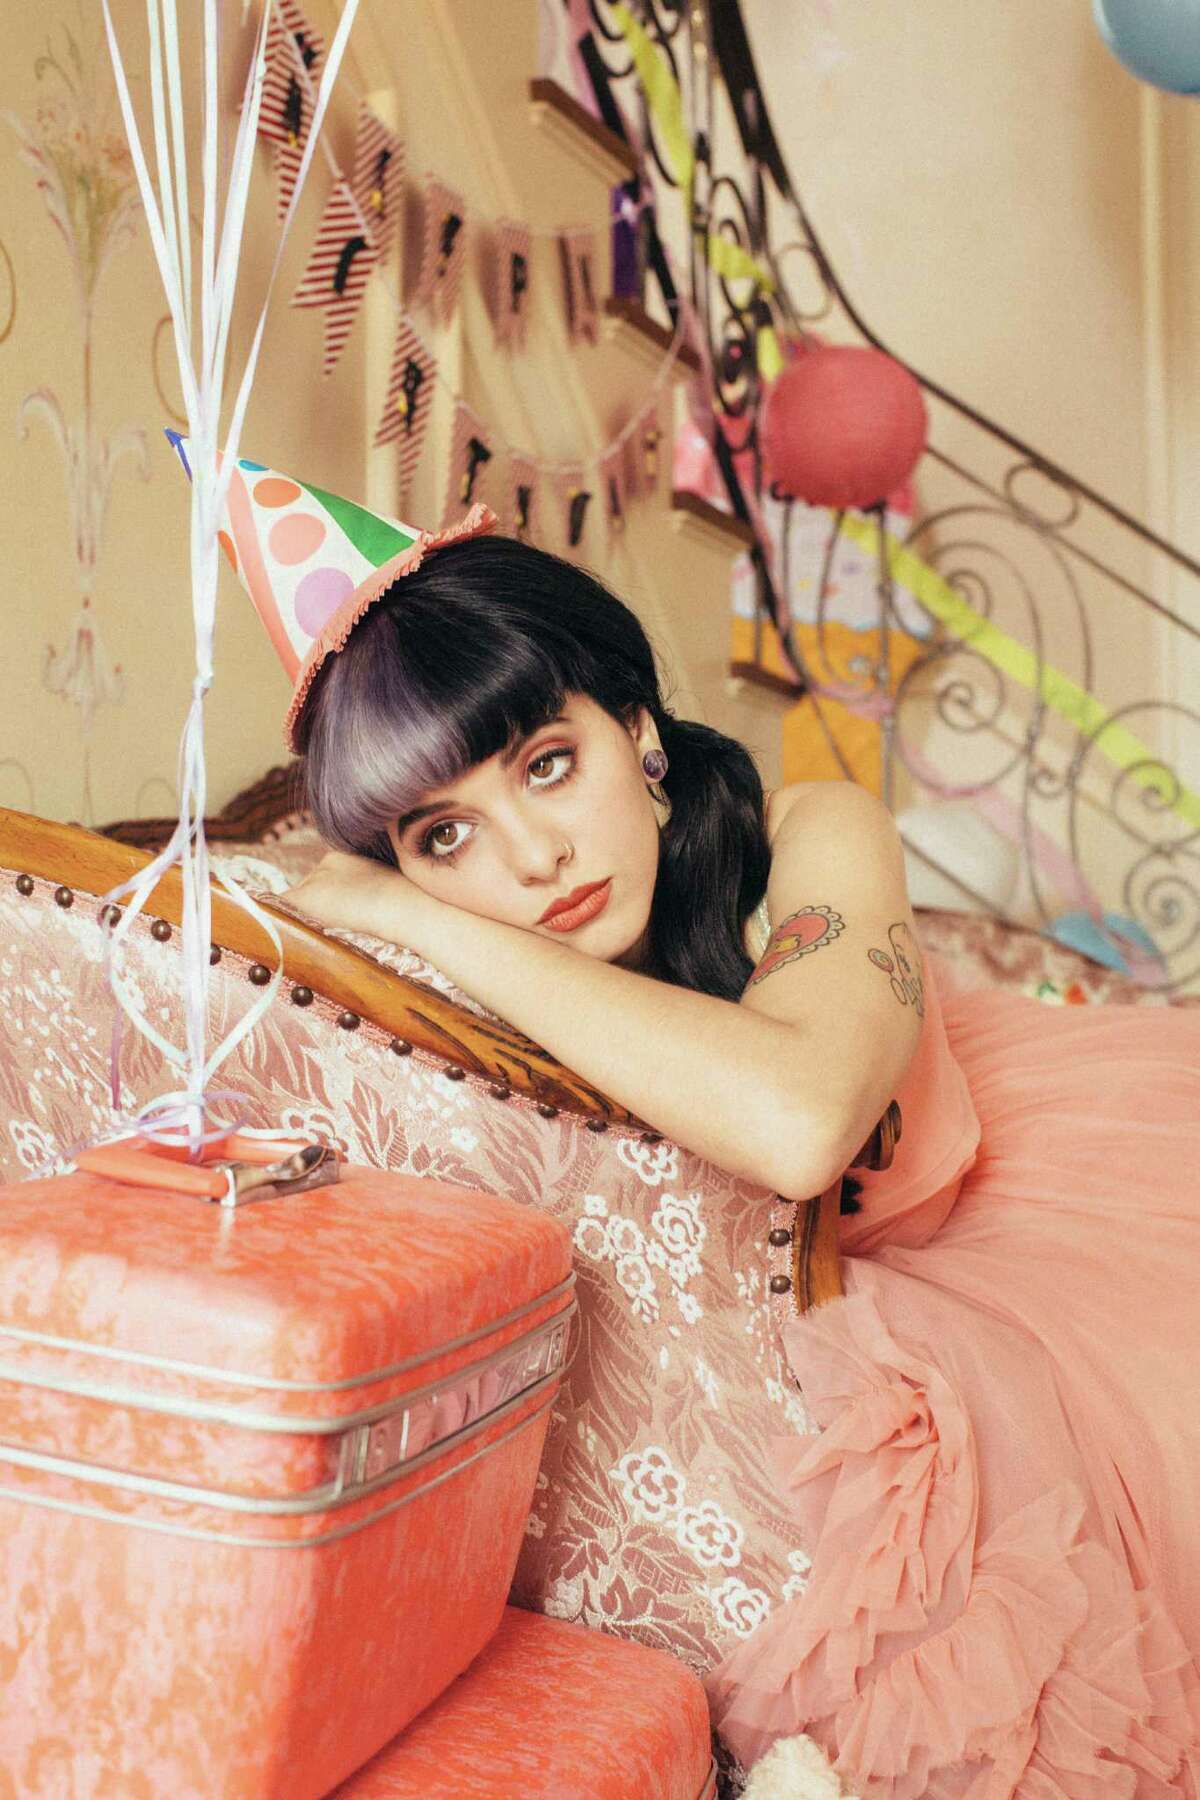 Melanie Martinez Finds Voice With Cry Baby